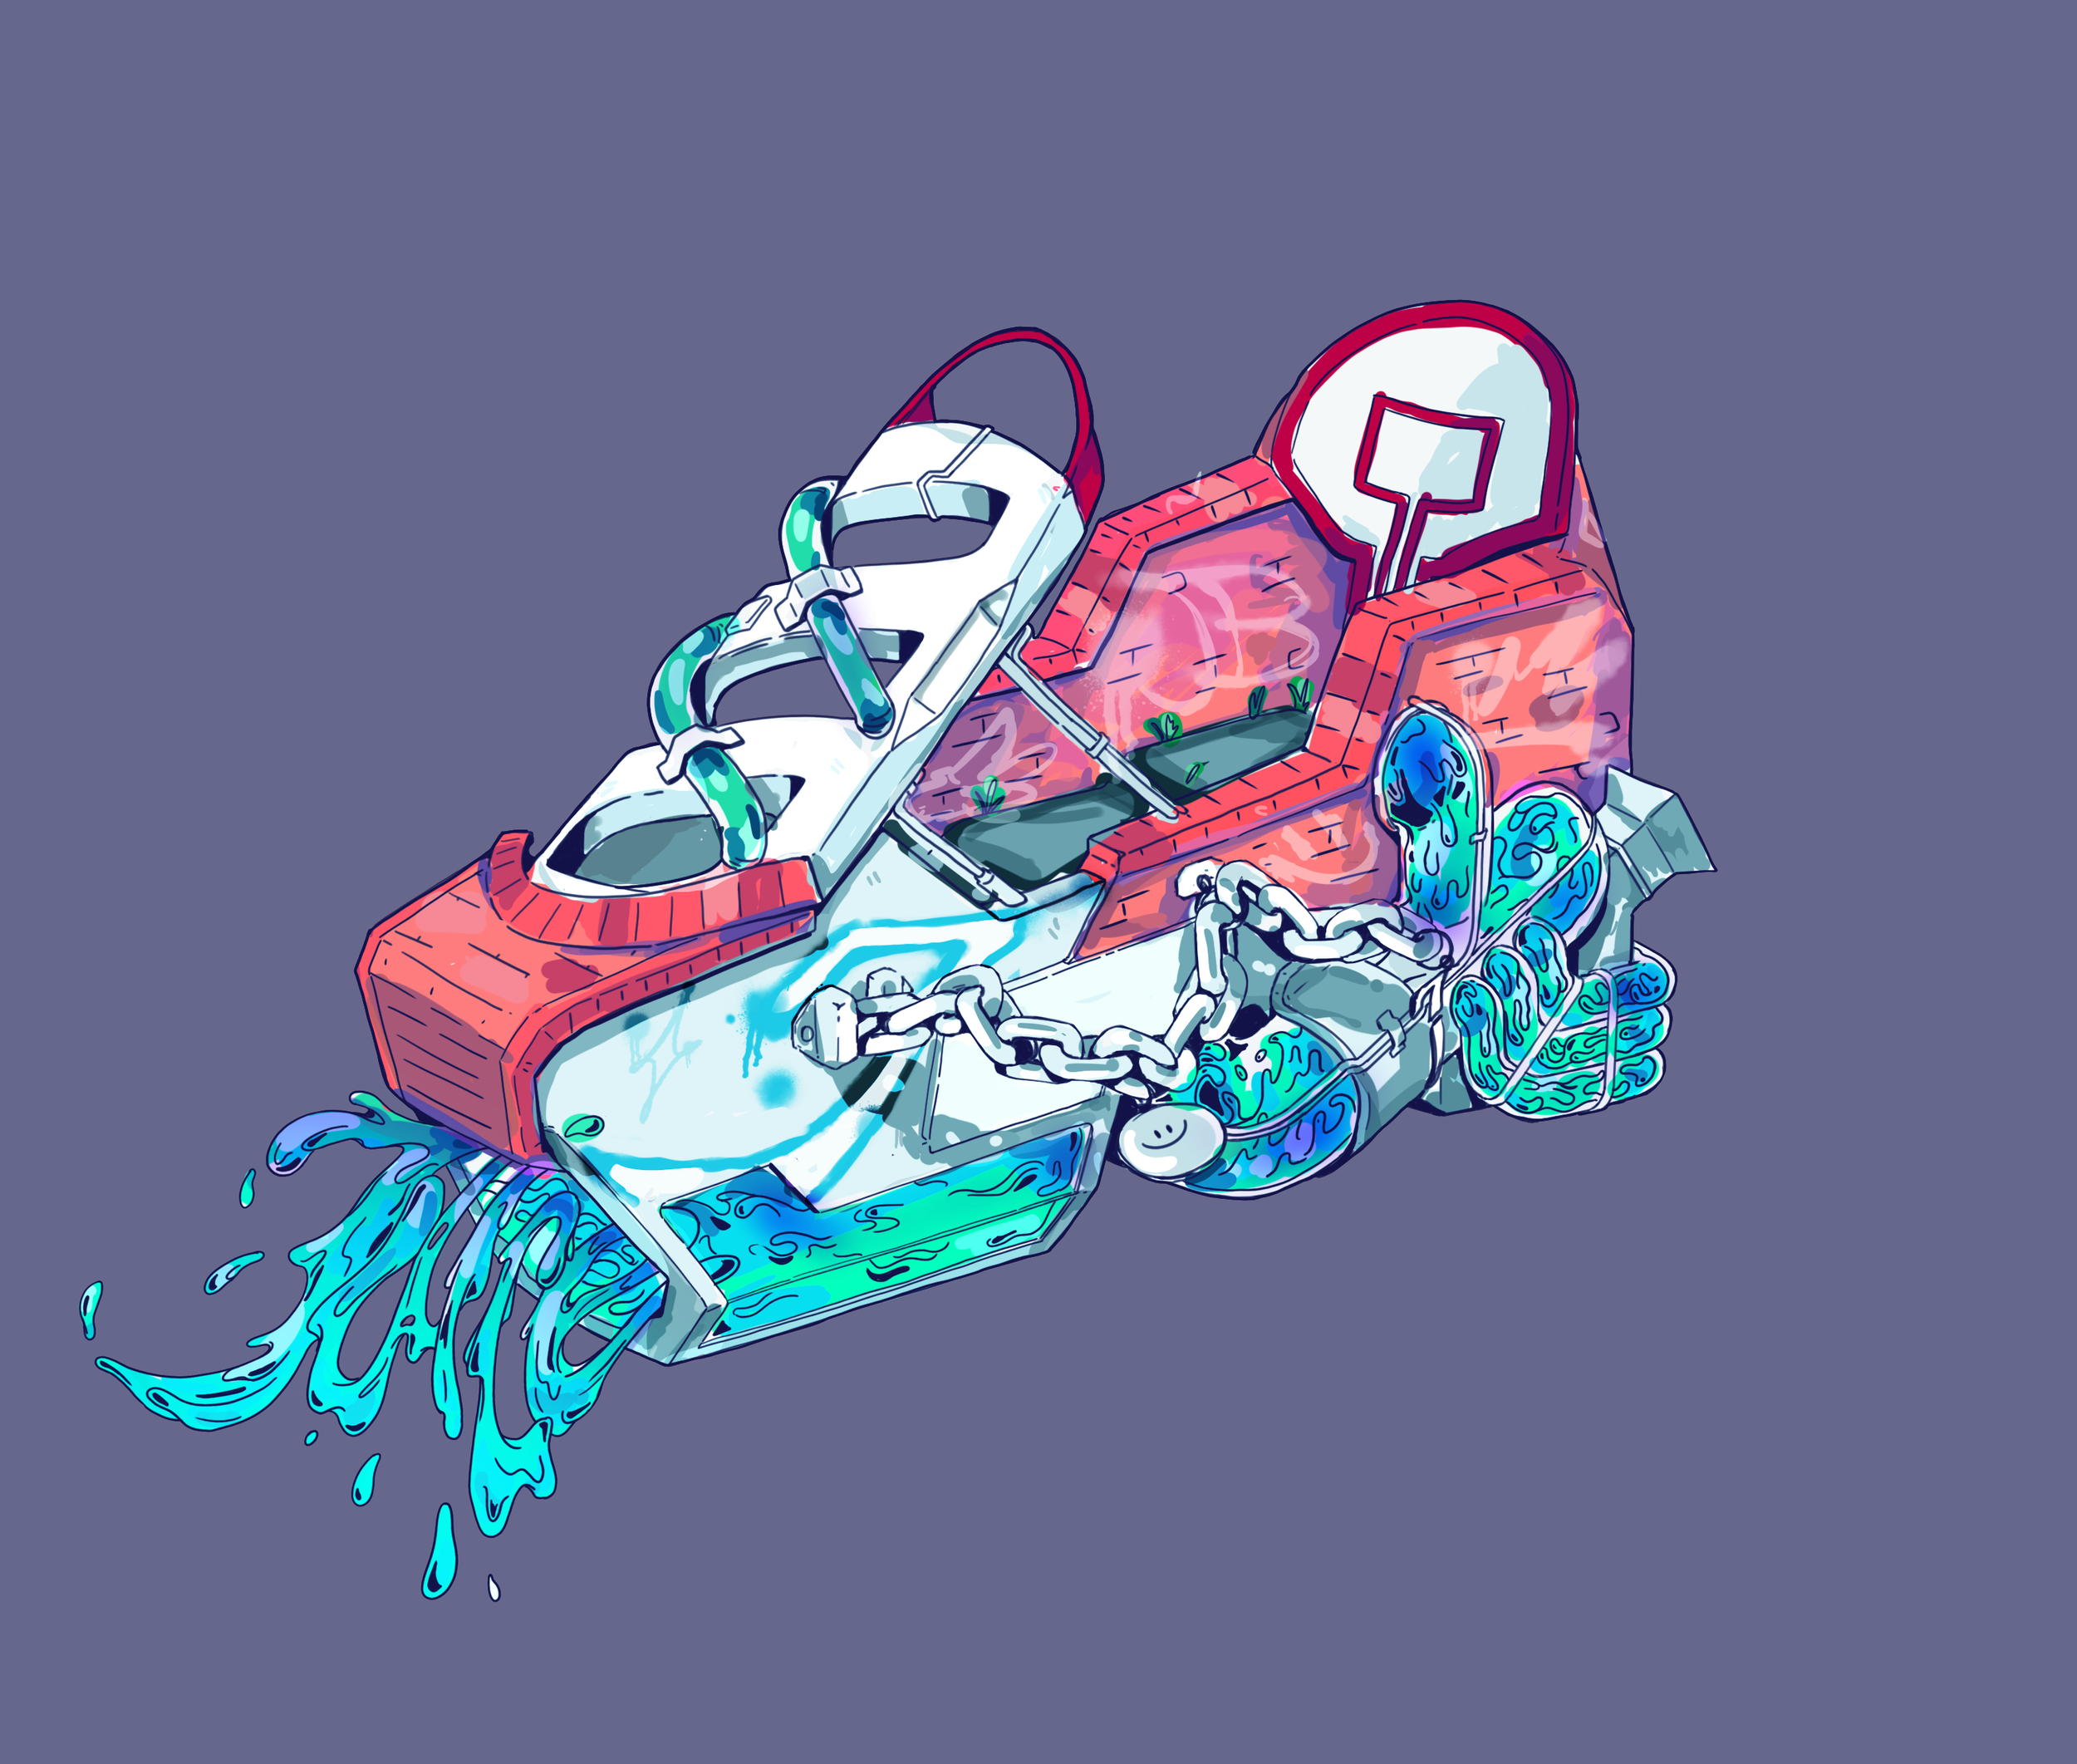  Concept proposal for shoe company collab 